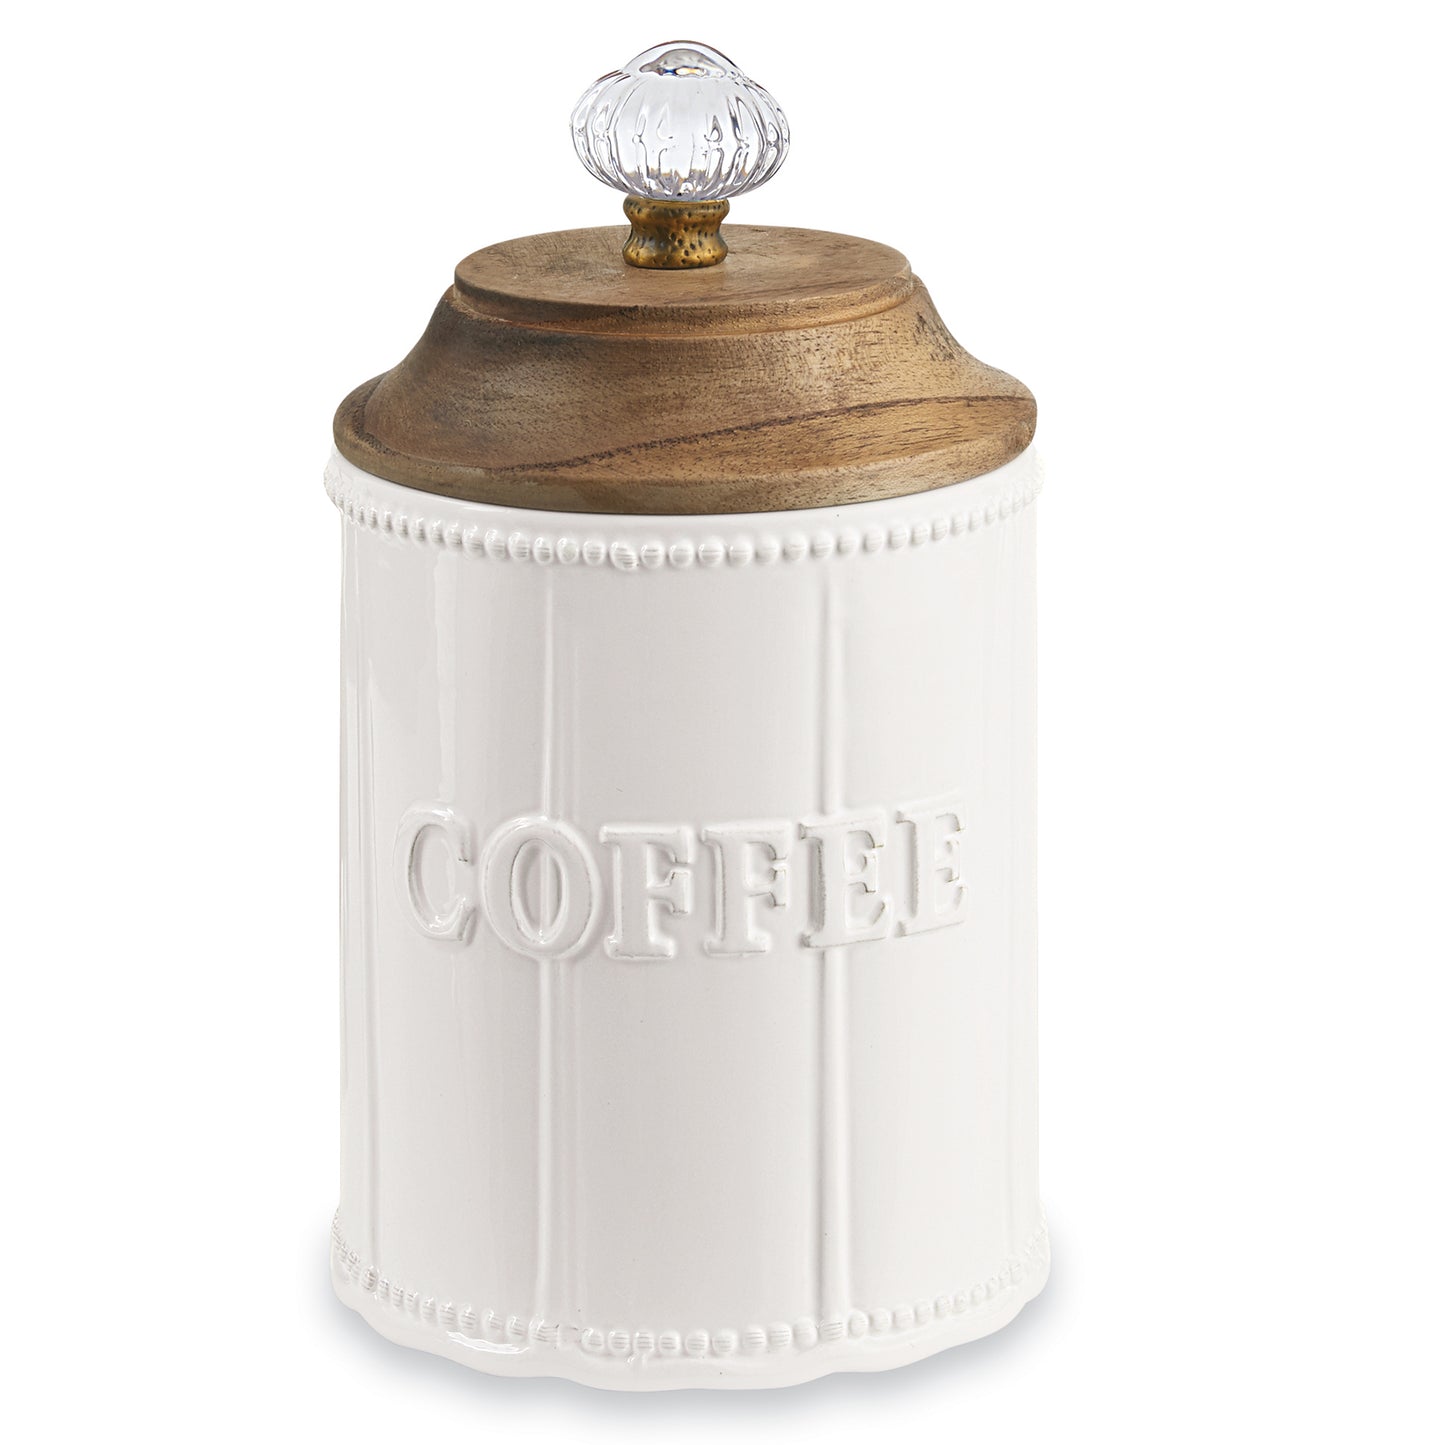 door knob coffee canister is white and has a wooden lid with a glass knob on top on a white background